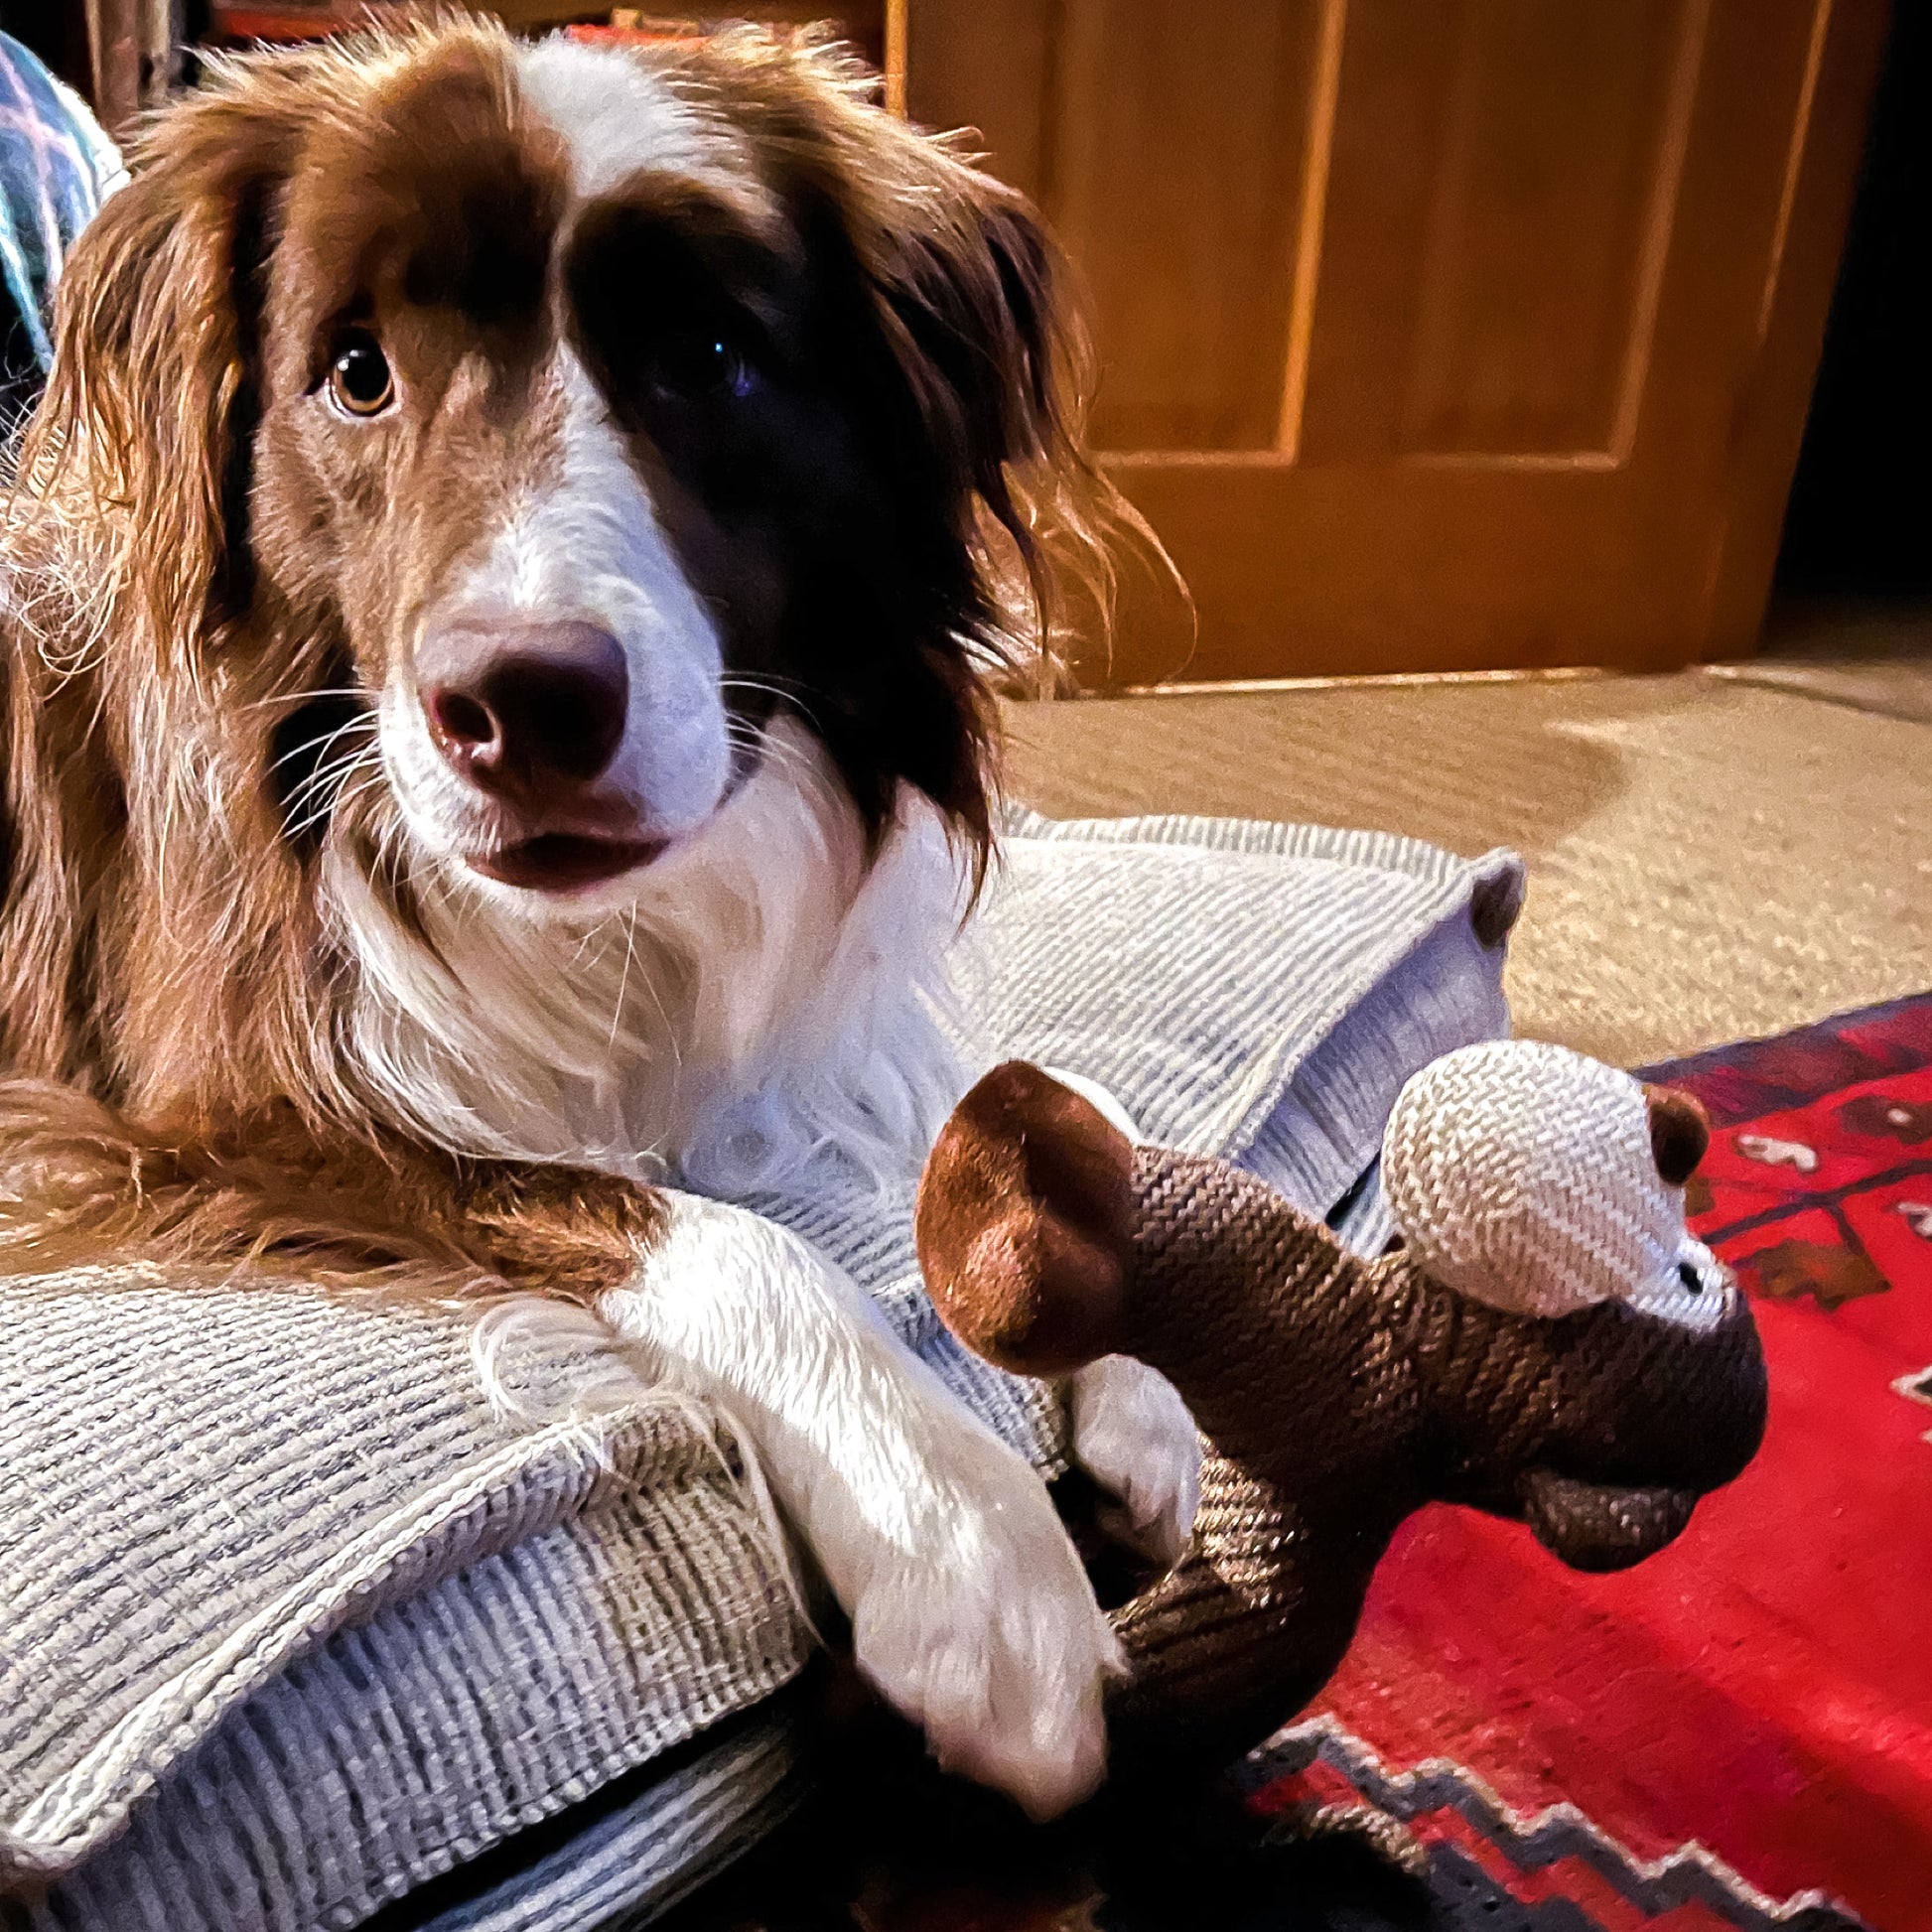 monkey dog toy from Border Loves with border collie